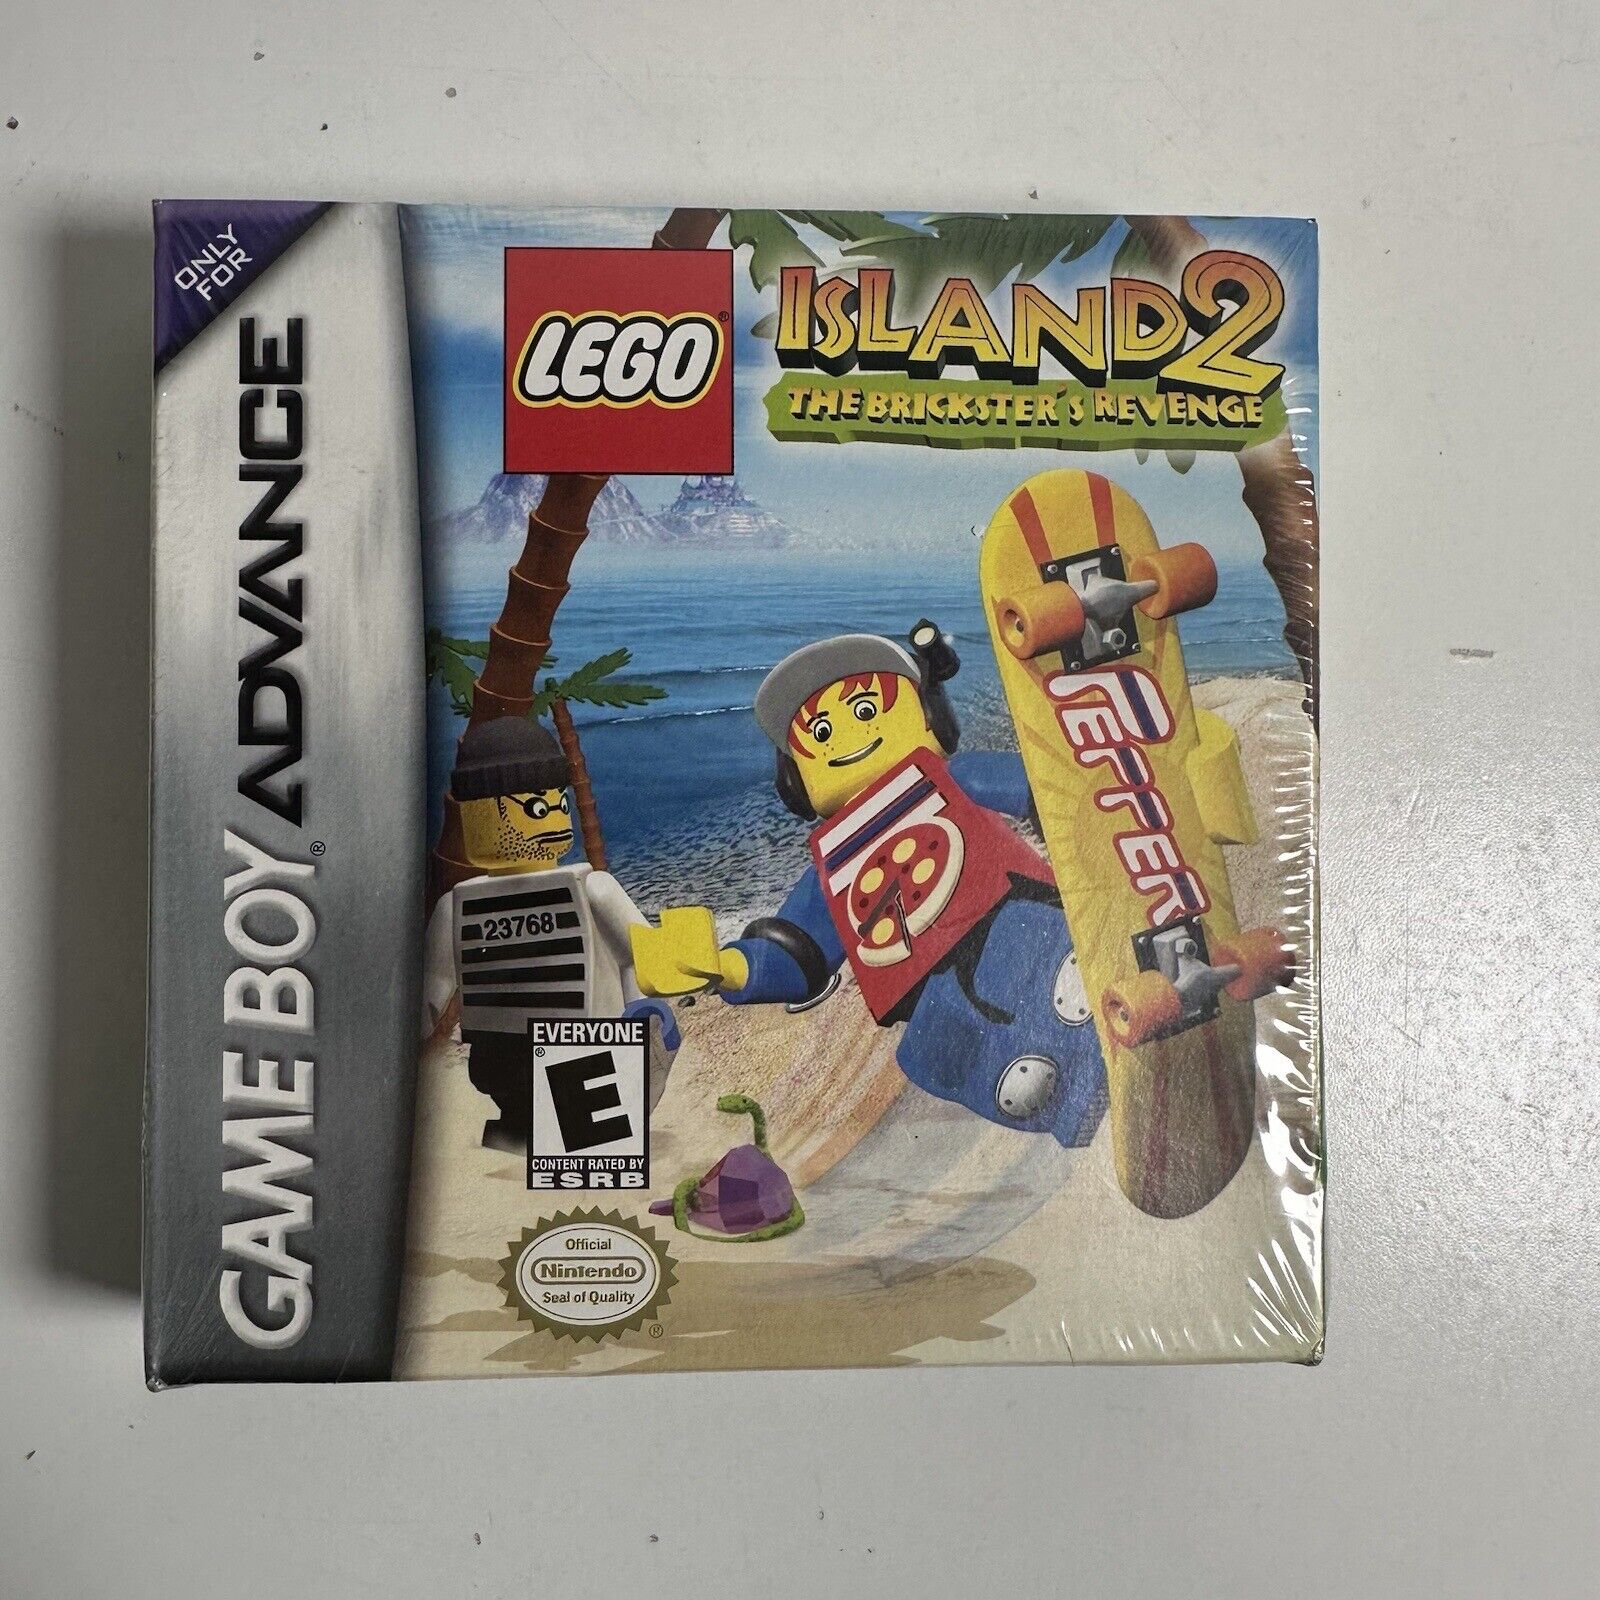 Lego Island 2 The Bricksters Revenge GBA Gameboy Advance Factory Sealed